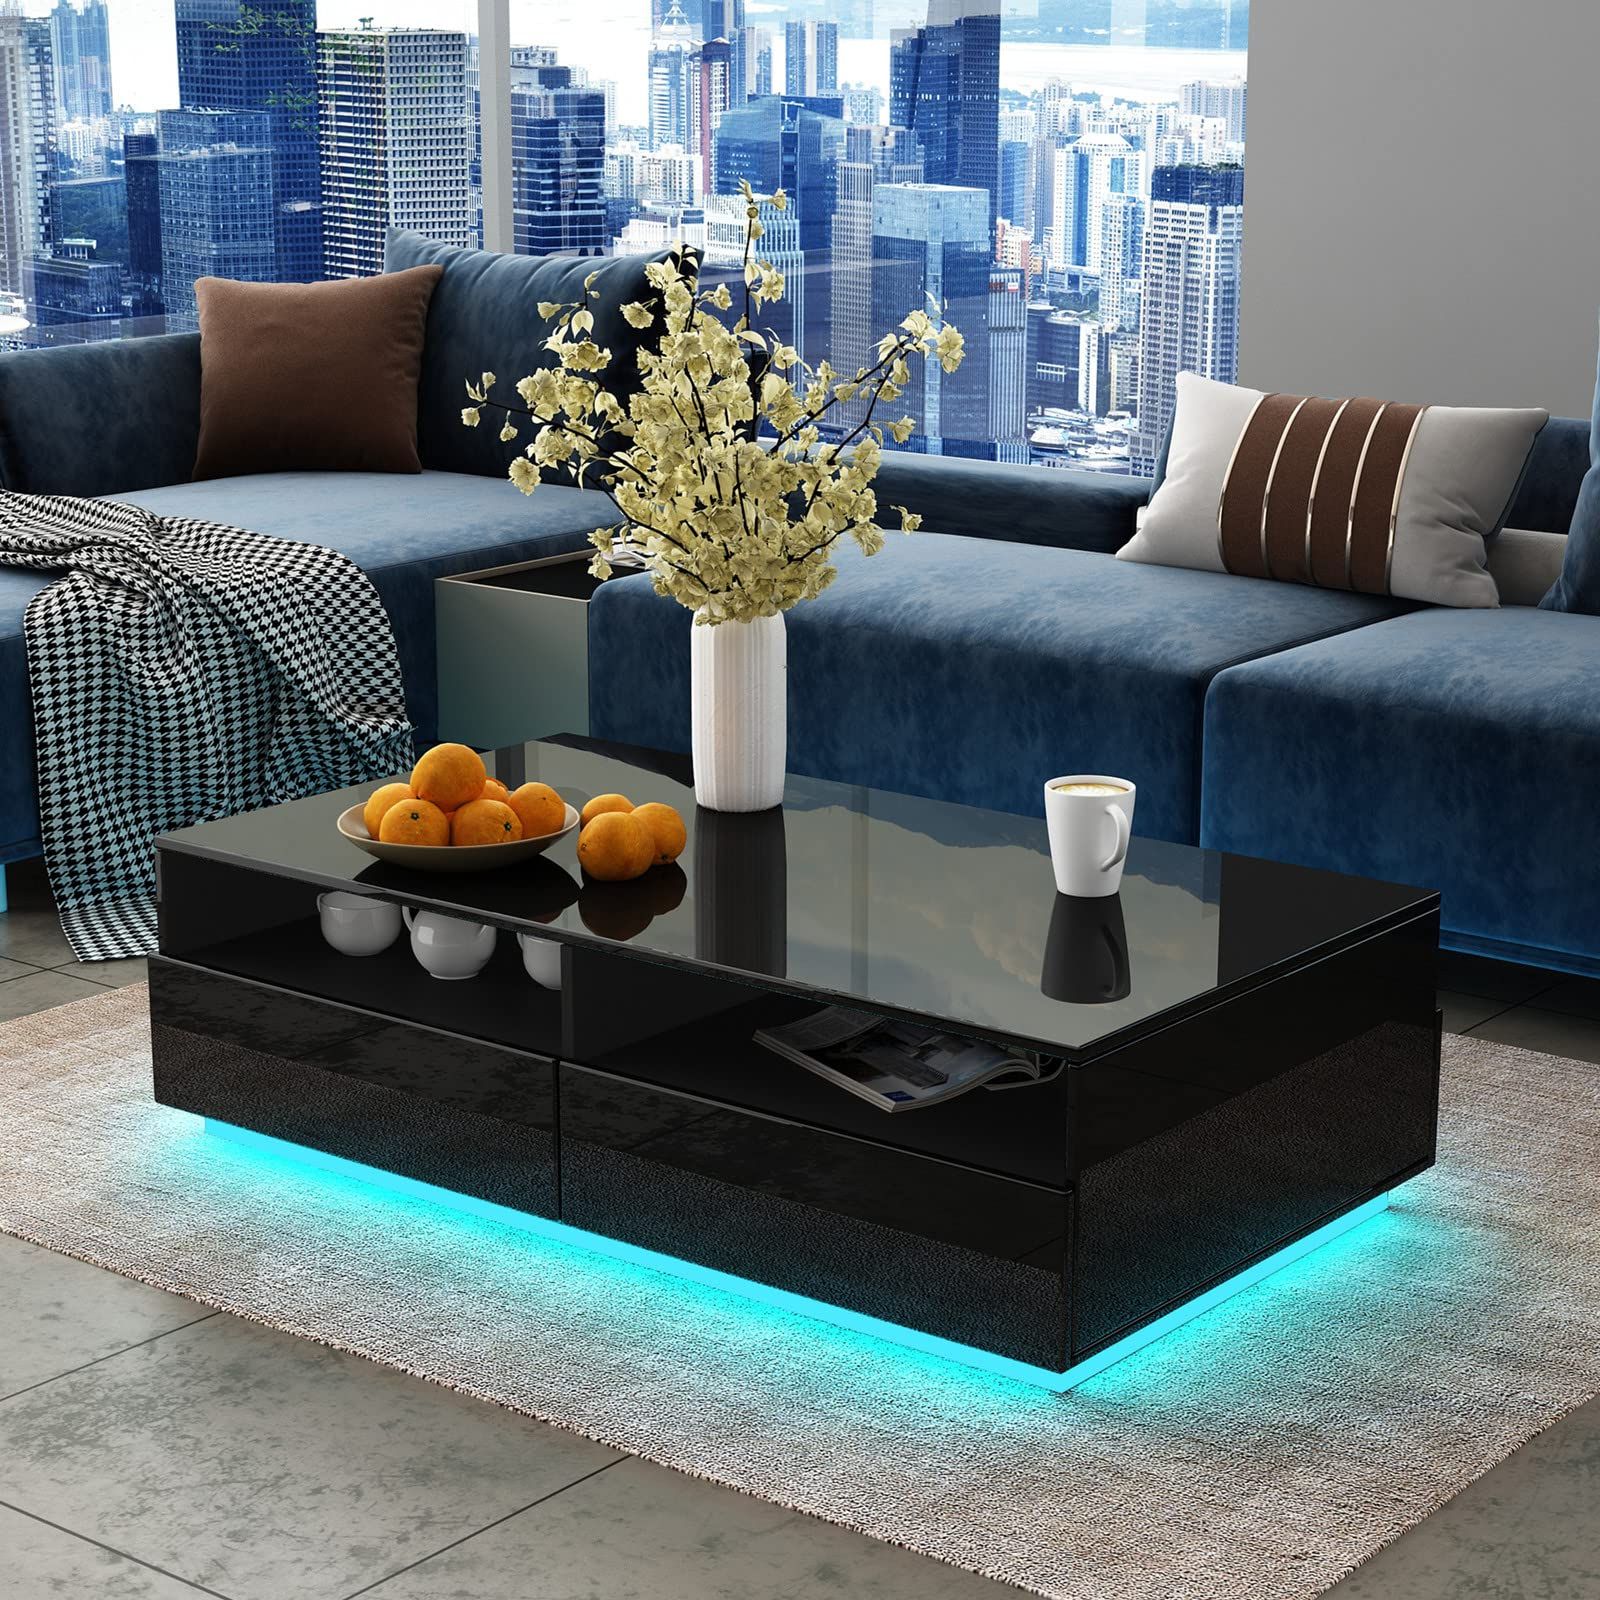 Preferred Coffee Tables With Led Lights Throughout Awoood Coffee Table For Living Room,led Side Table Modern Wooden Centre  Table,black Gloss Coffee Tables With 4 Drawer Storage For Home :  Amazon.co.uk: Home & Kitchen (Photo 7 of 10)